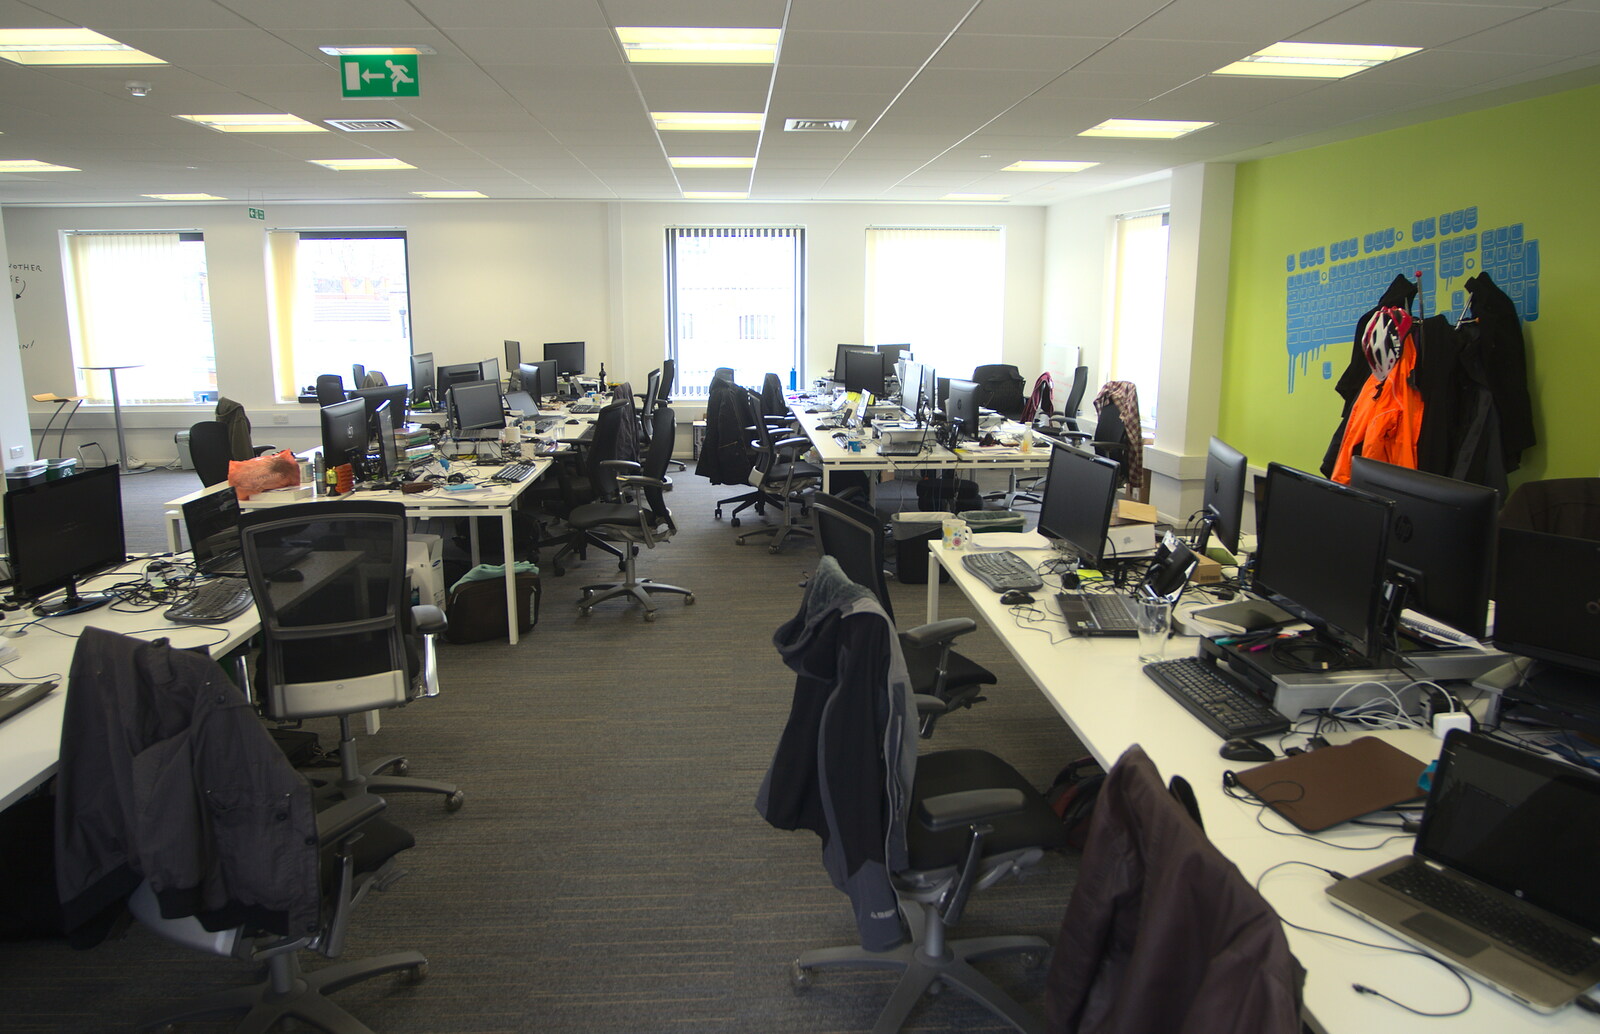 When Nosher gets to work, the office is deserted from Margaret Thatcher's Funeral, St. Paul's, London - 17th April 2013